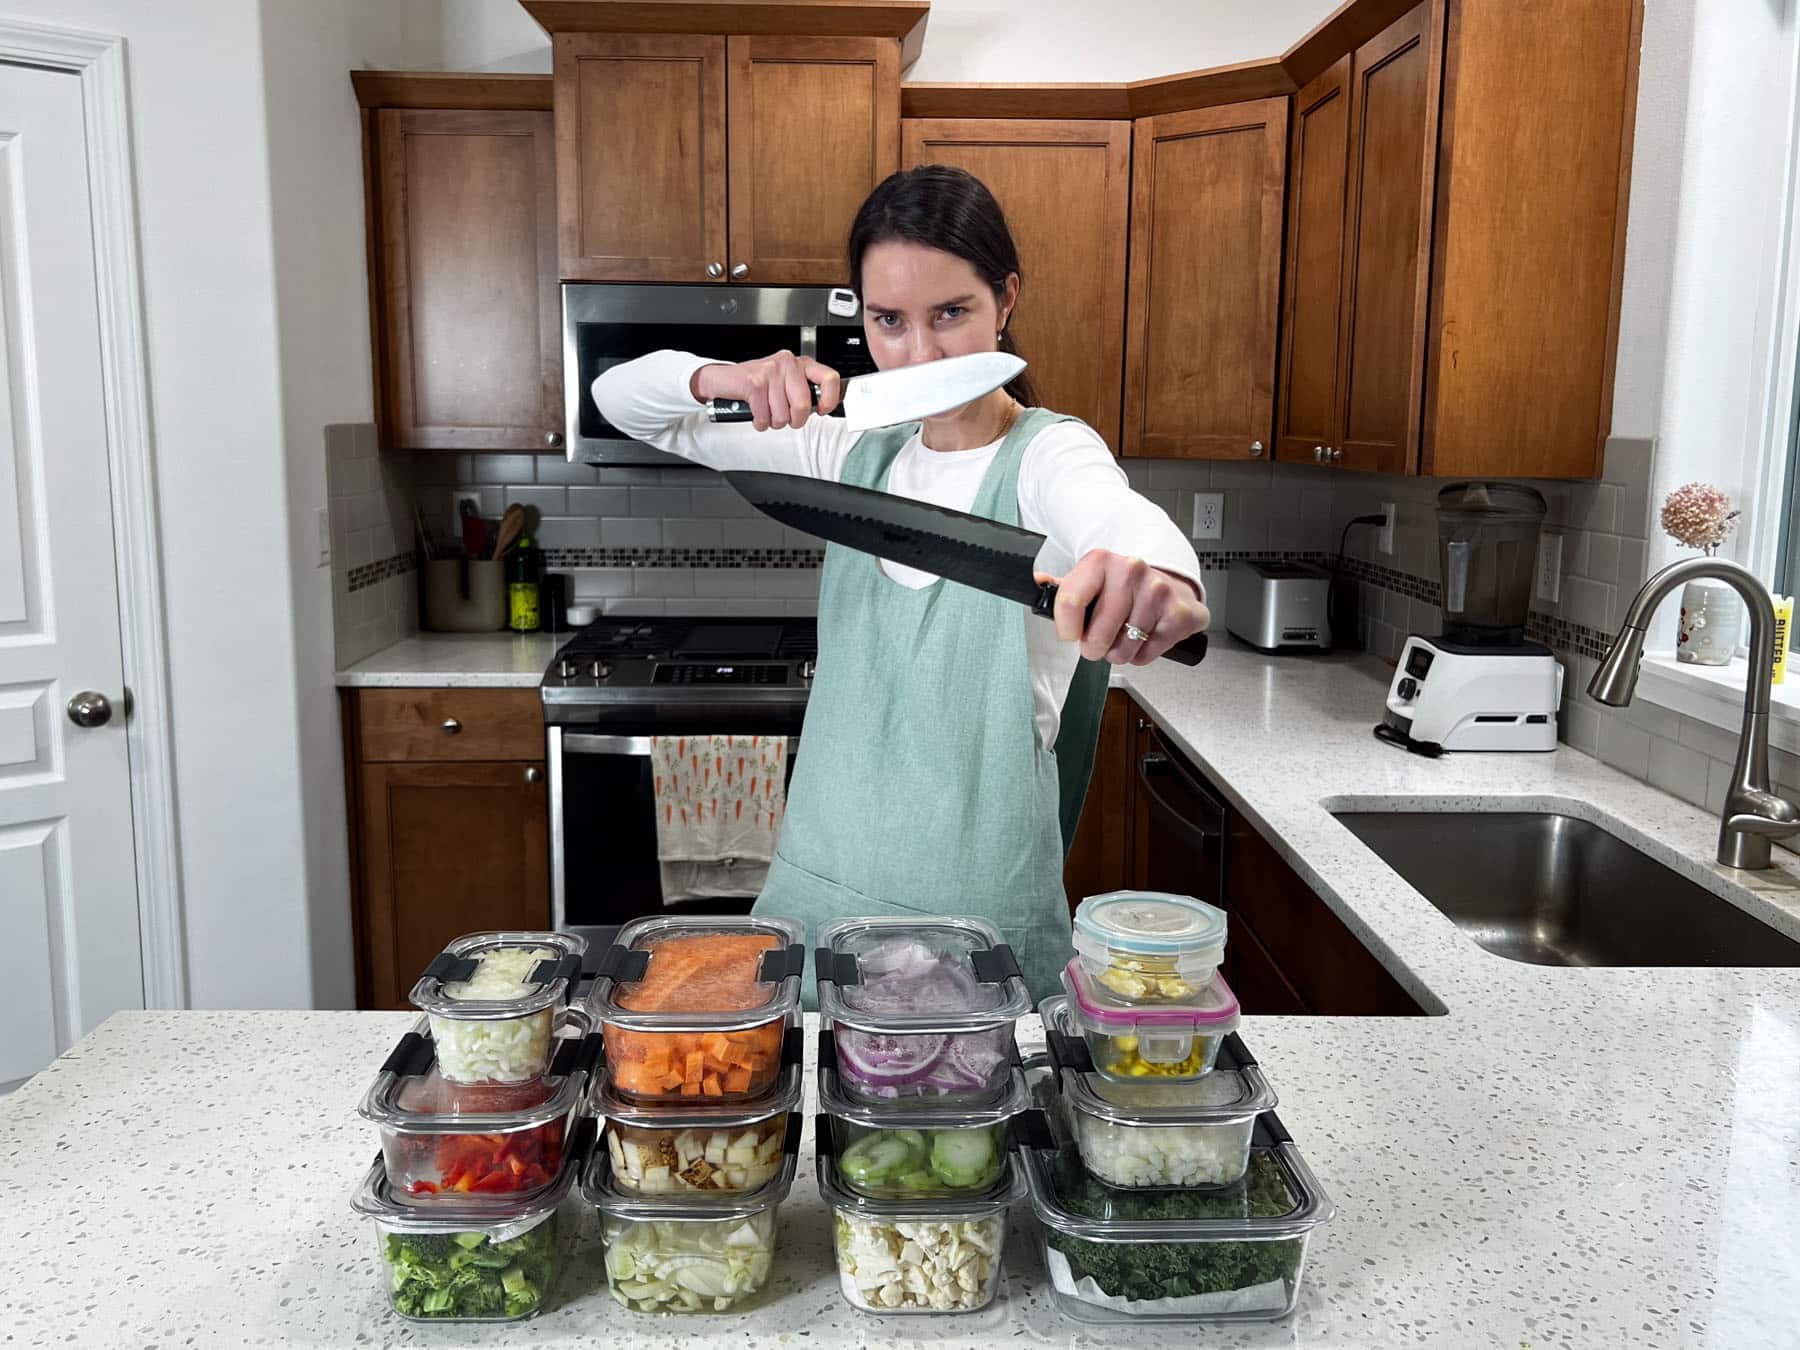 natalie showing several containers of prepped food